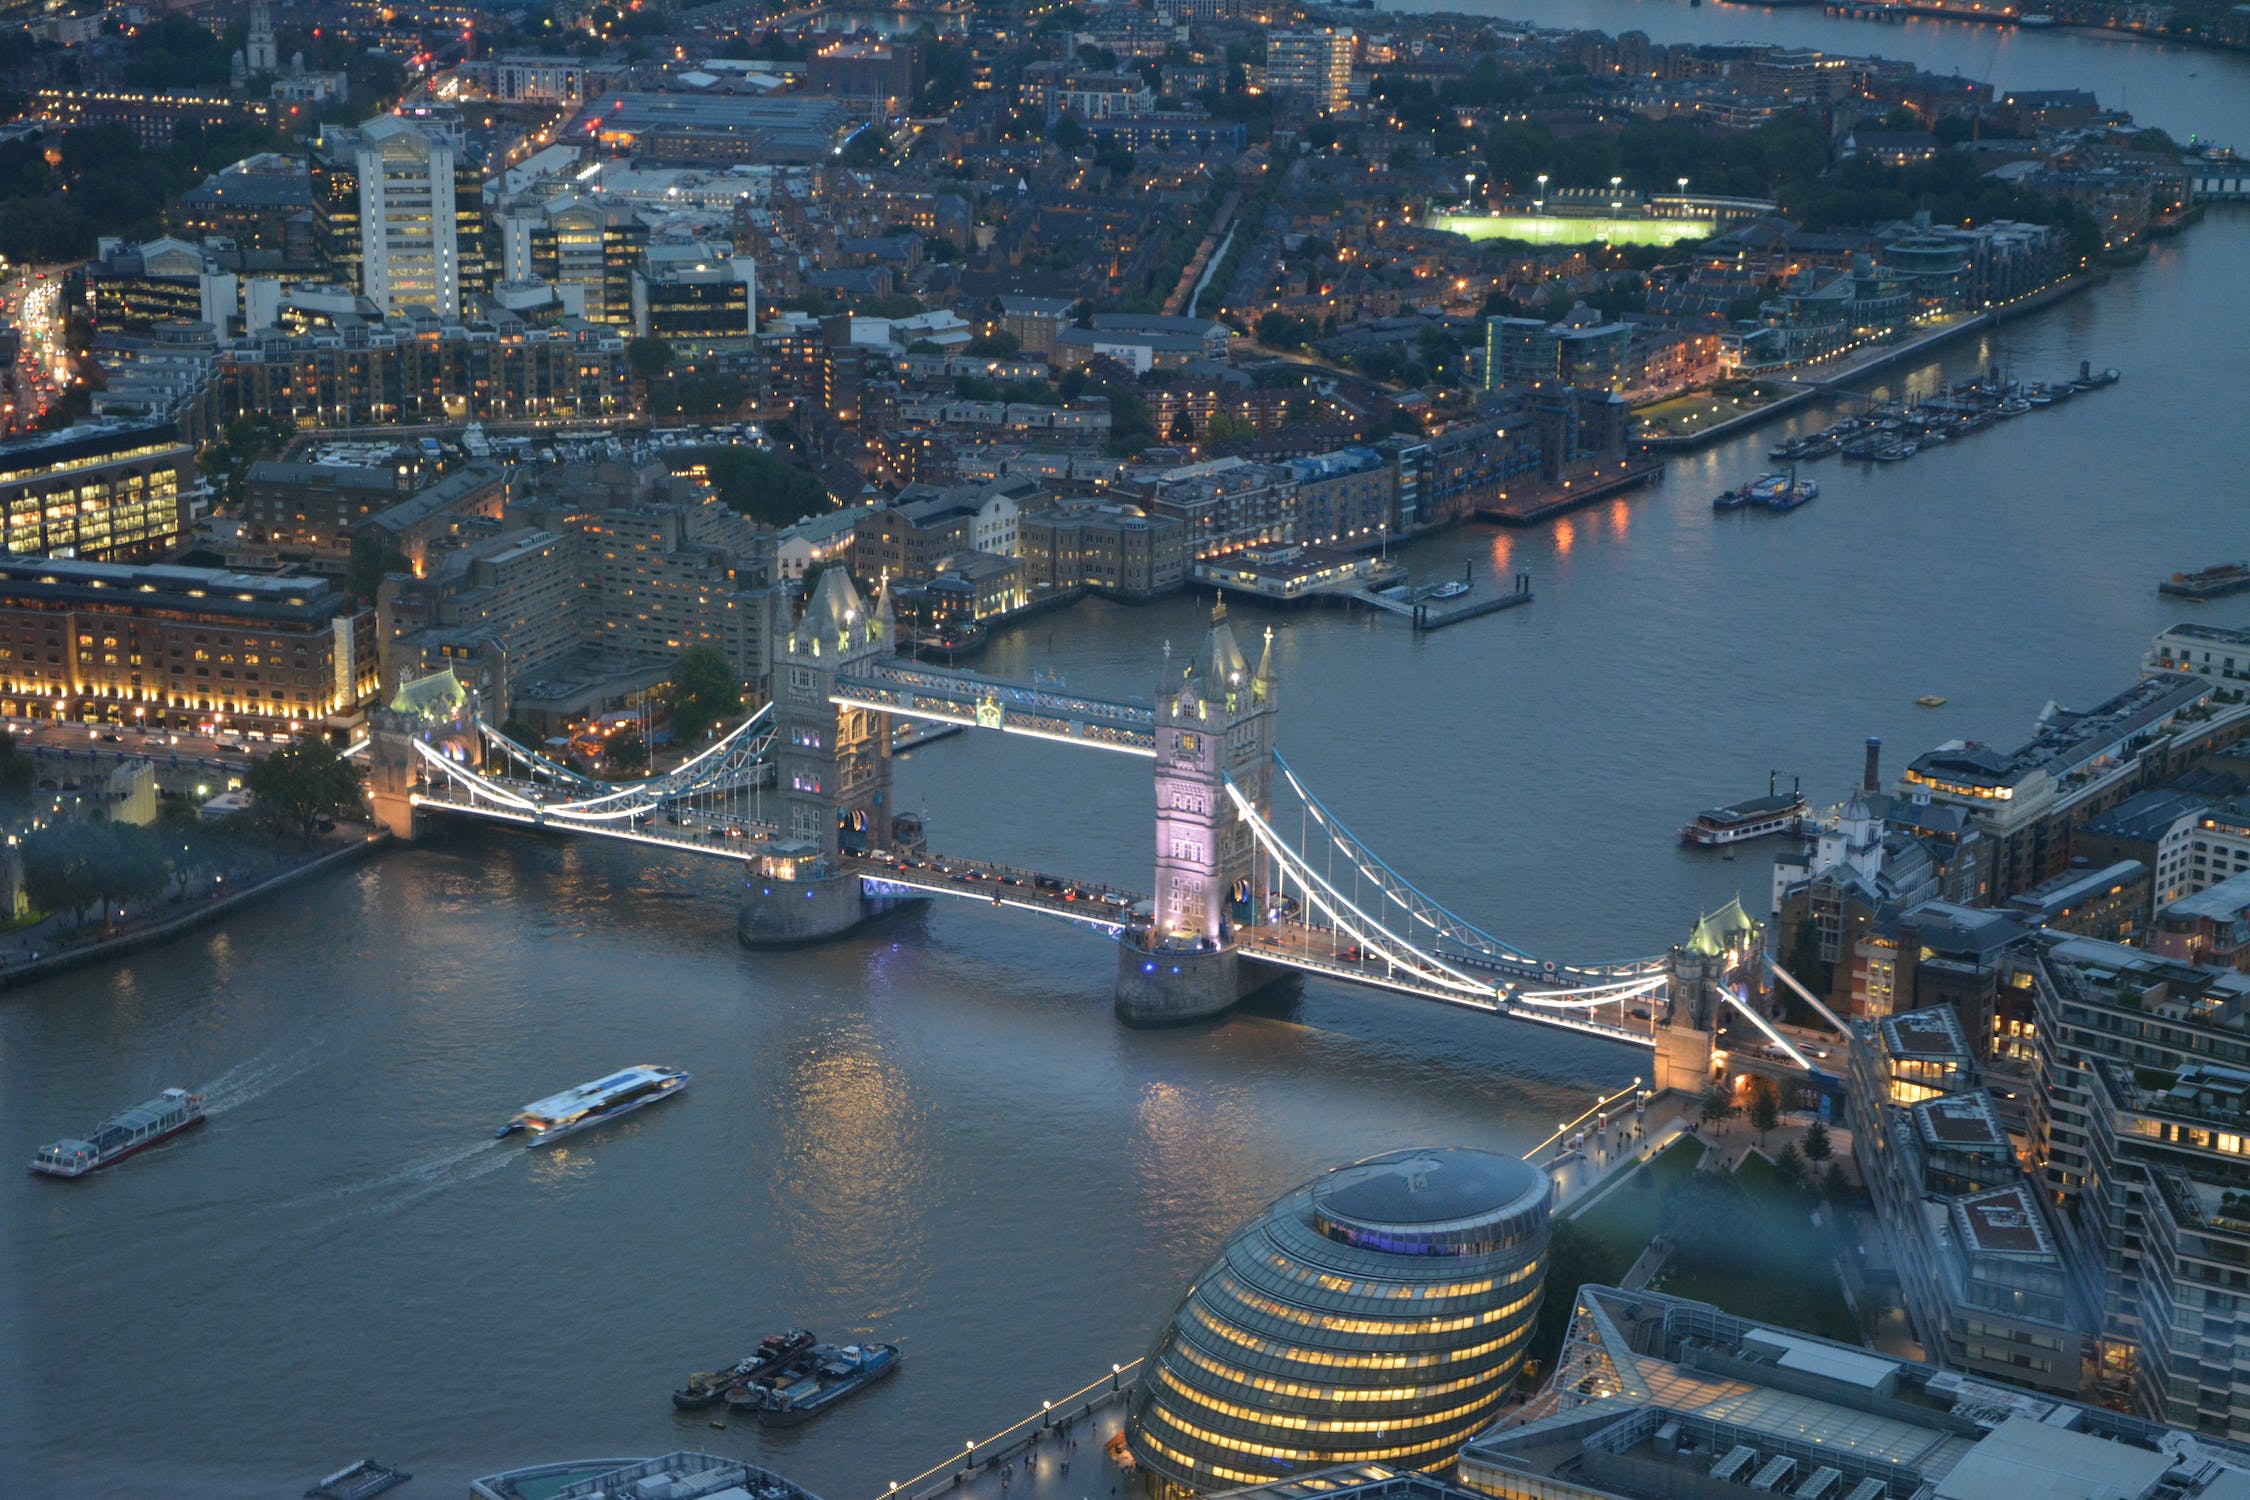 Image showing the city of London at night